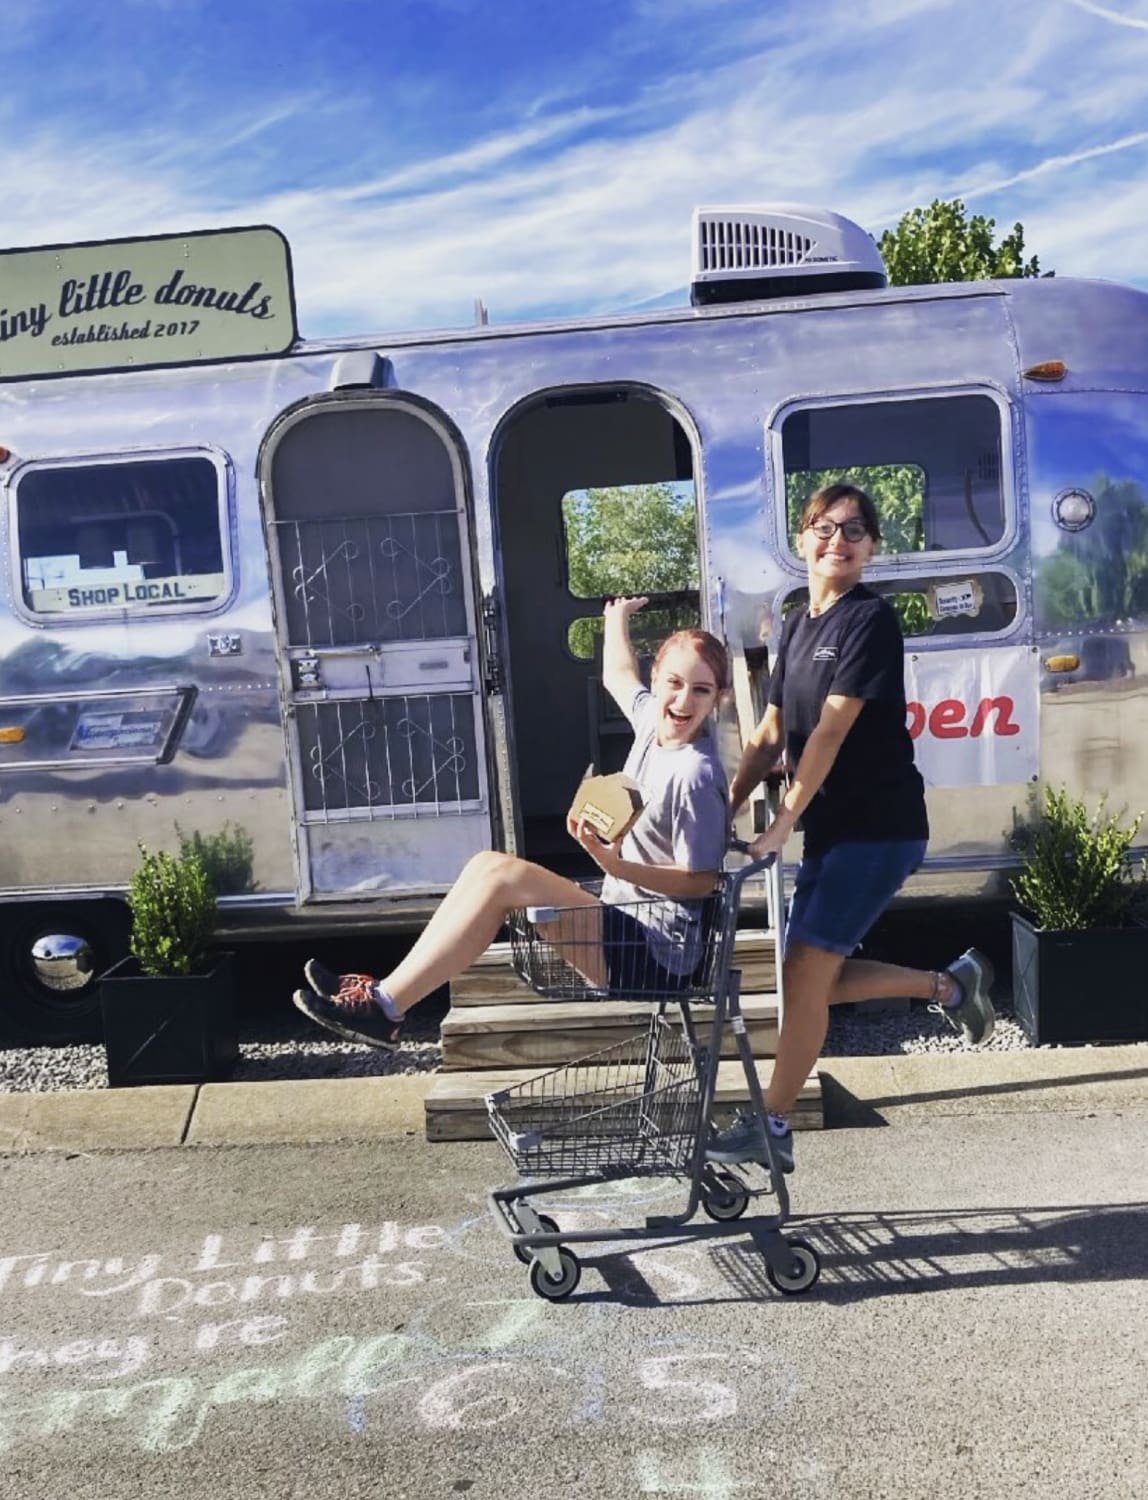 picture of two kids playing in front of the tiny little donuts airstream